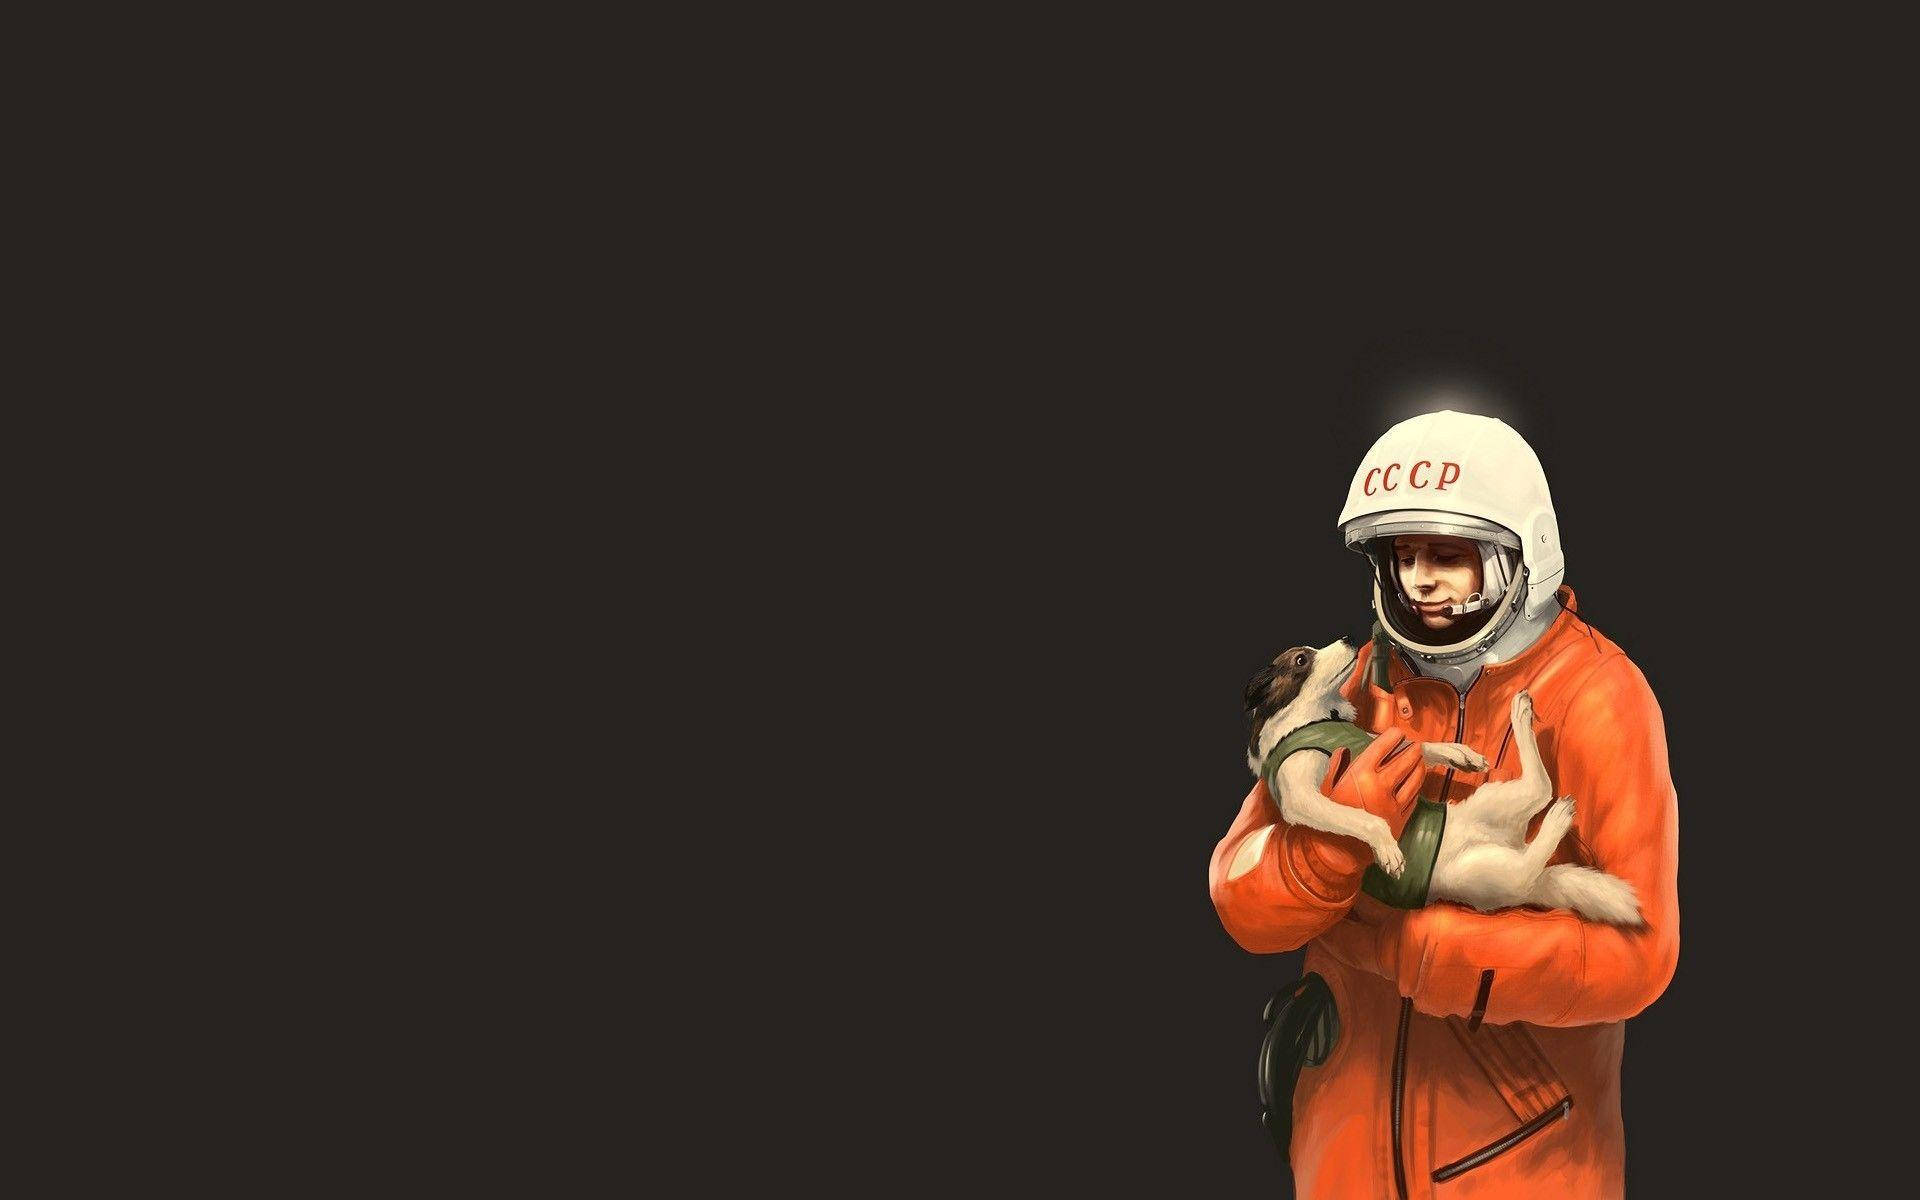 Image Of Spaceman Snuggling  A Dog Wallpaper